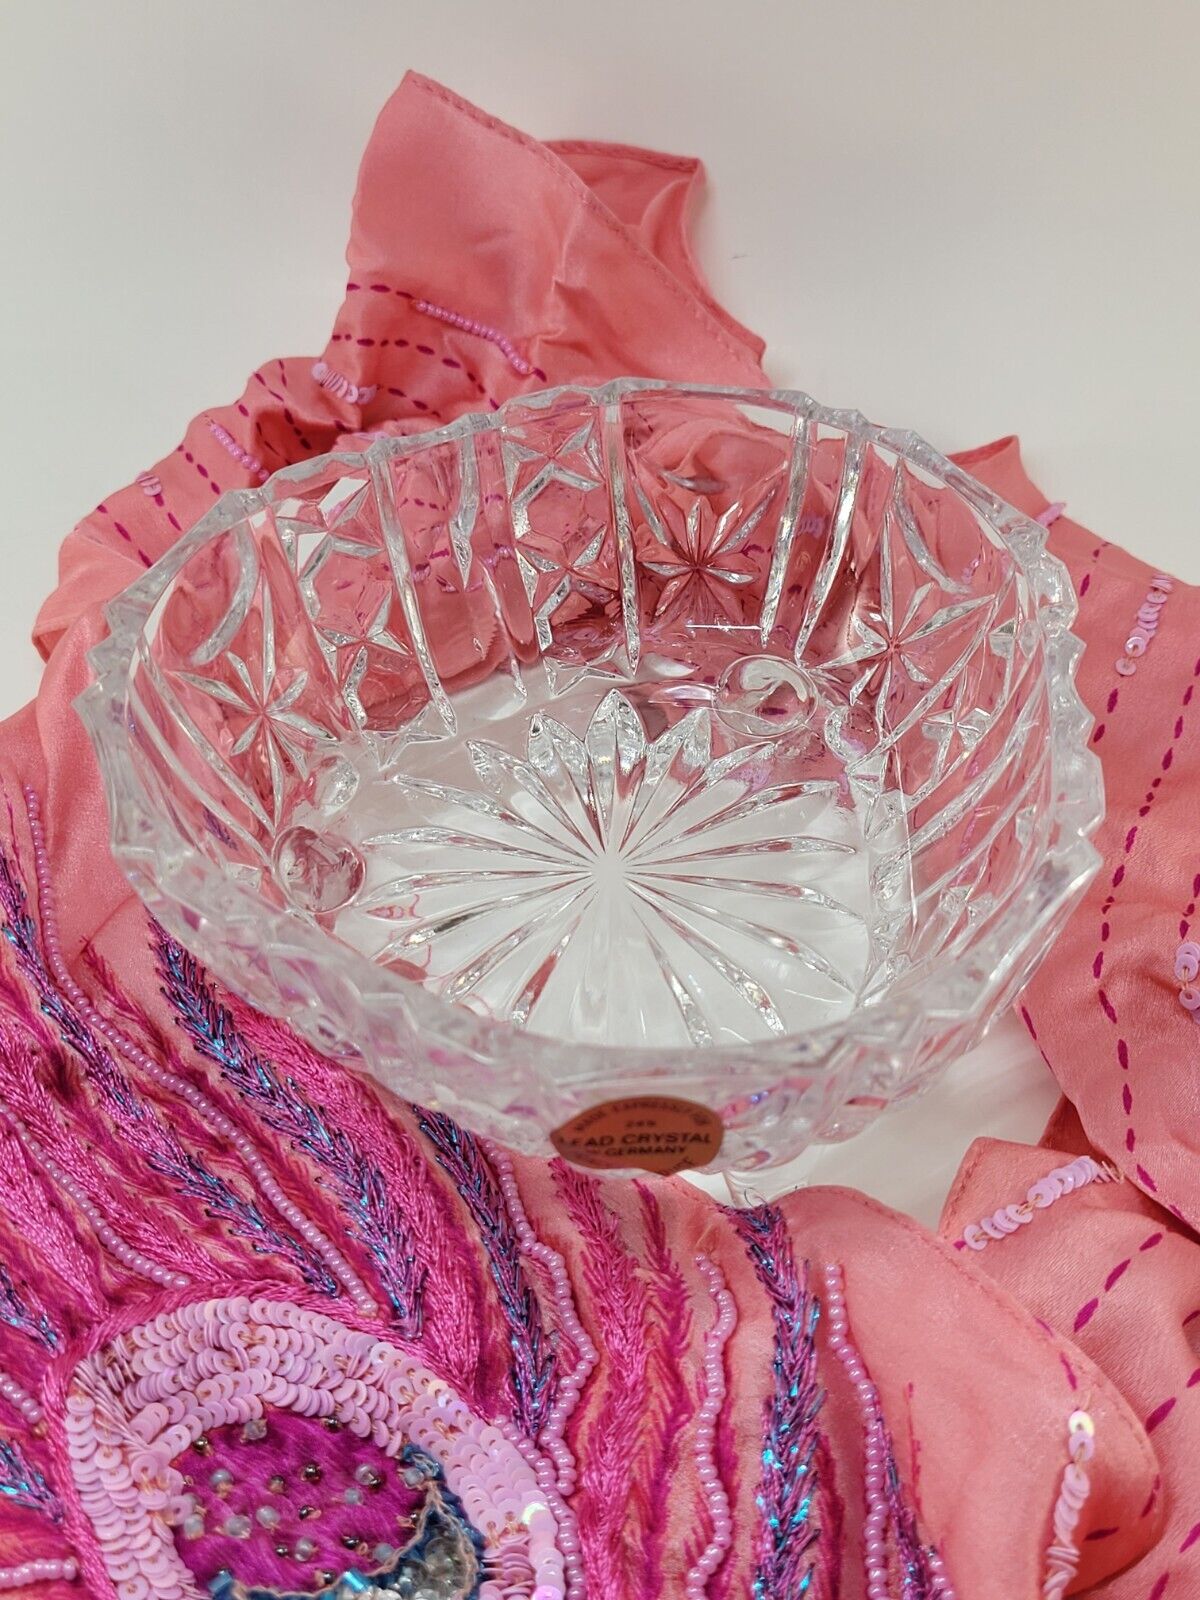 Vintage Princess House 3-Sided Footed Dish Lead Crystal Bowl “Vintage Garden”